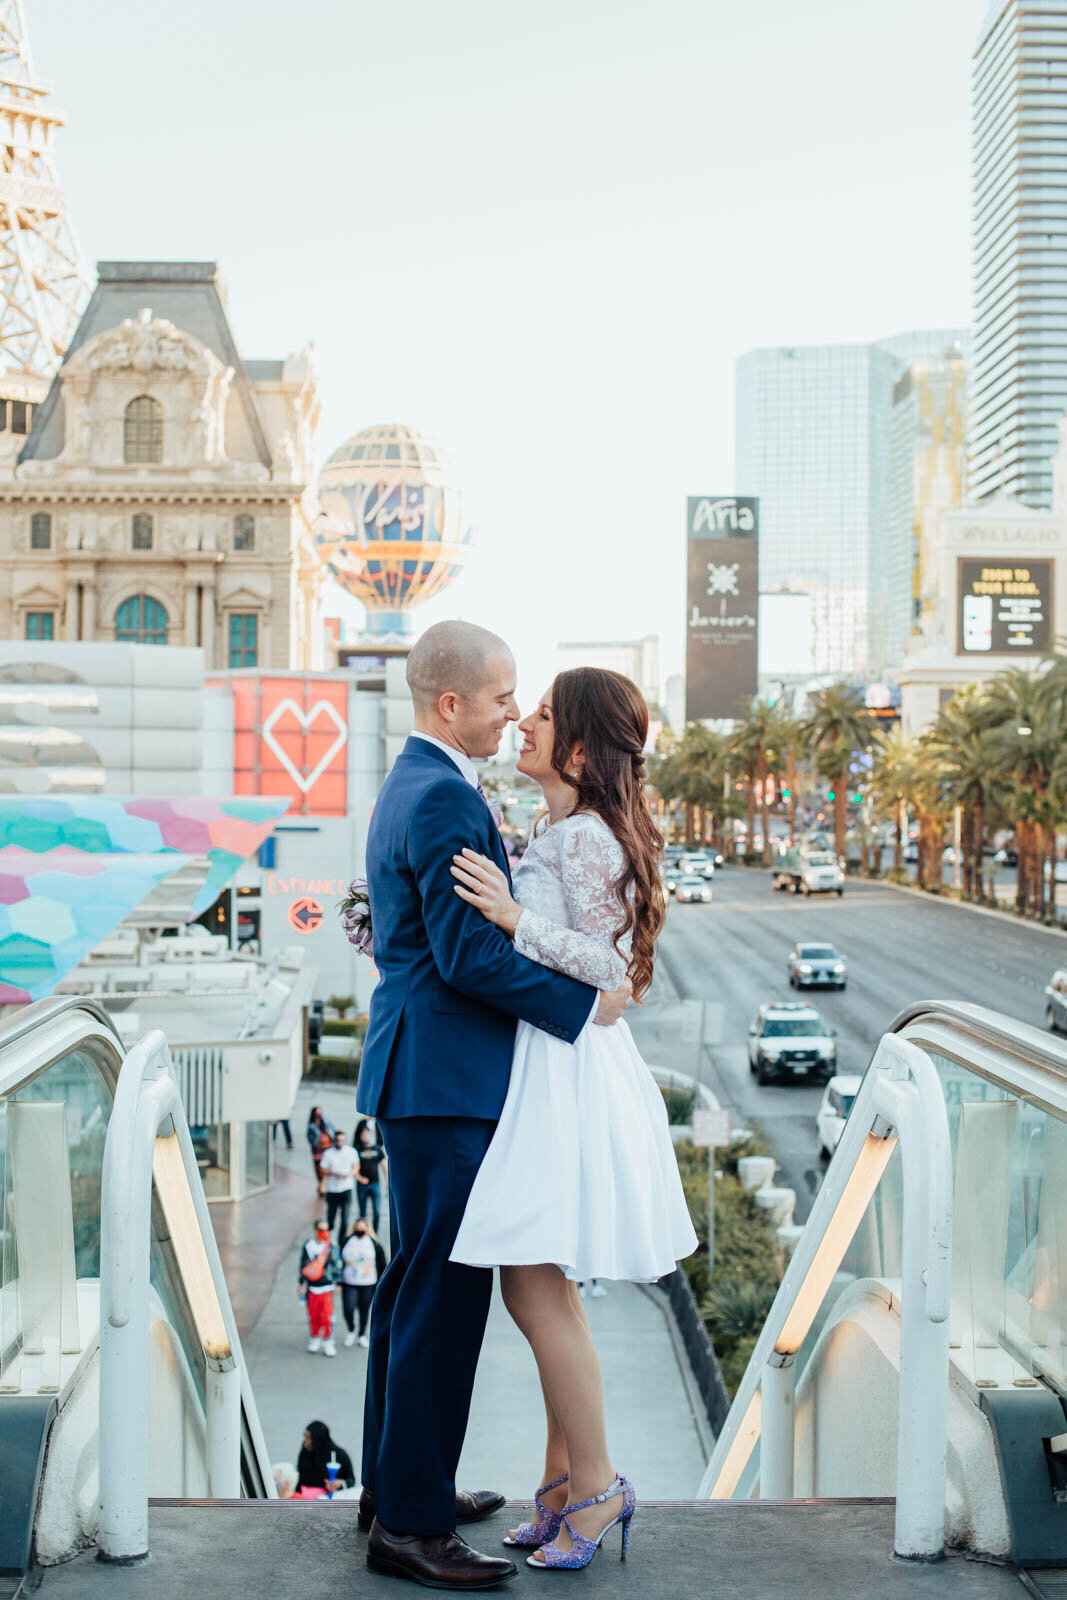 Elopement photos with a view on the Las Vegas strip